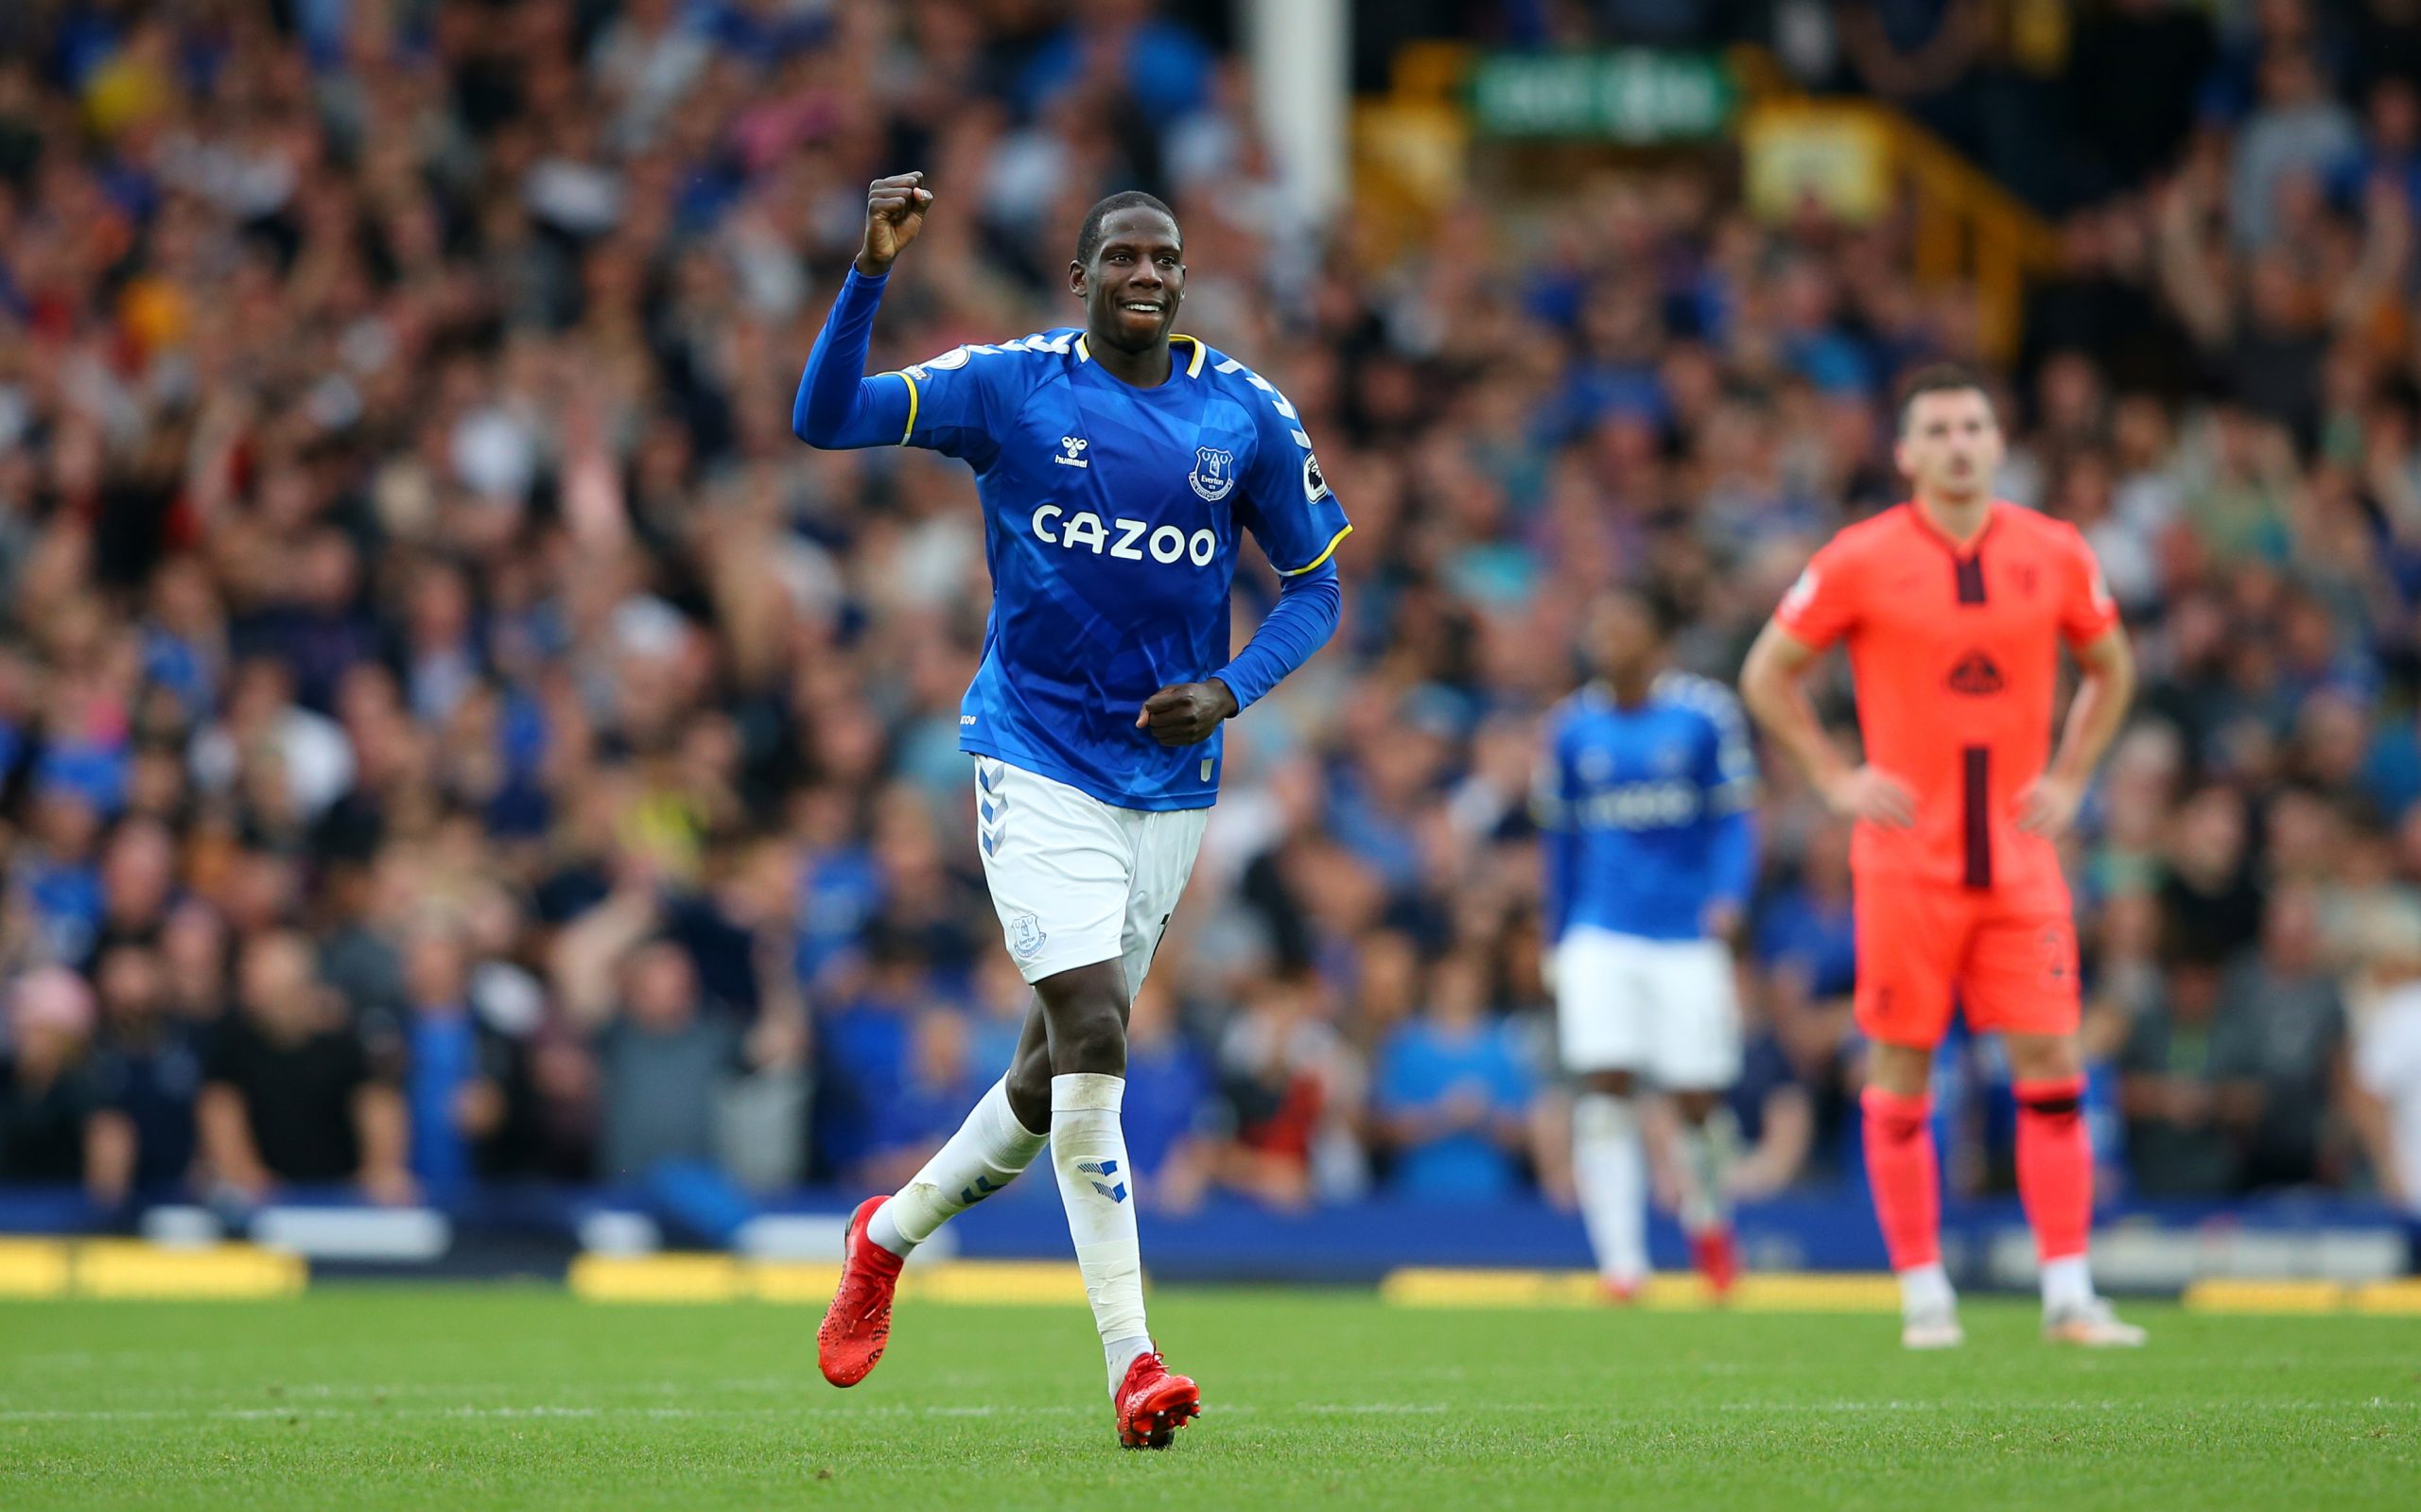 Abdoulaye Doucoure of Everton celebrates after scoring their side's second goal during the Premier League match between Everton and Norwich City. (Photo by Alex Livesey/Getty Images)